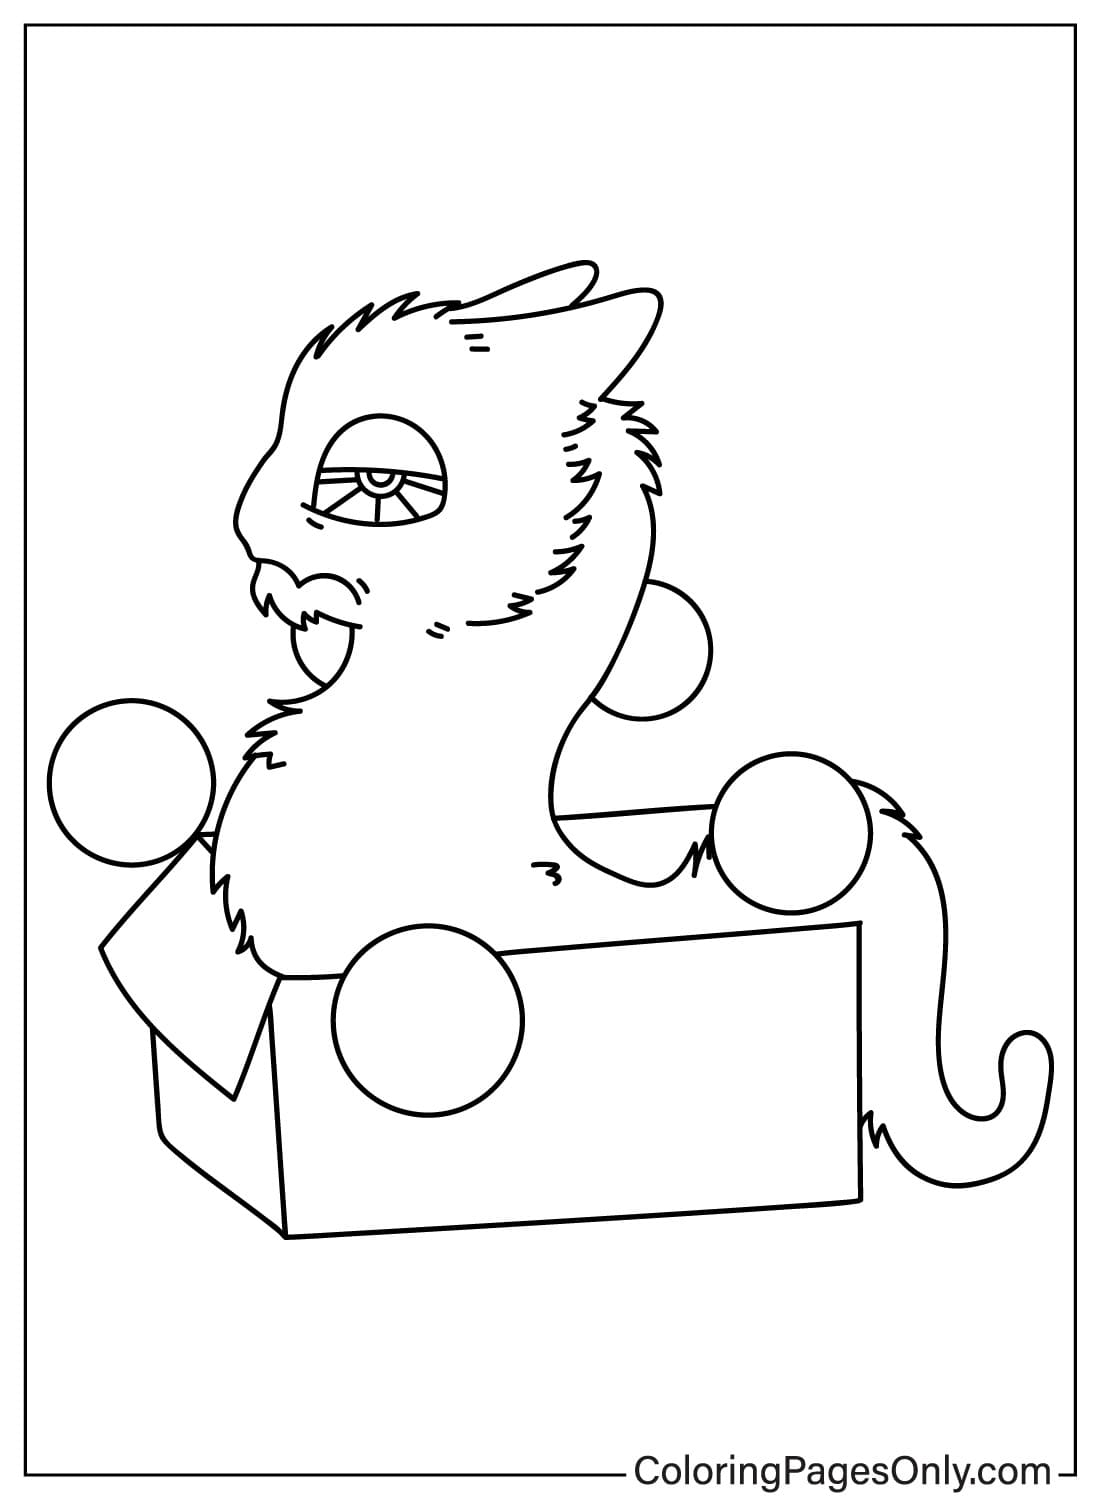 Drawing Ghazt Coloring Page from Ghazt